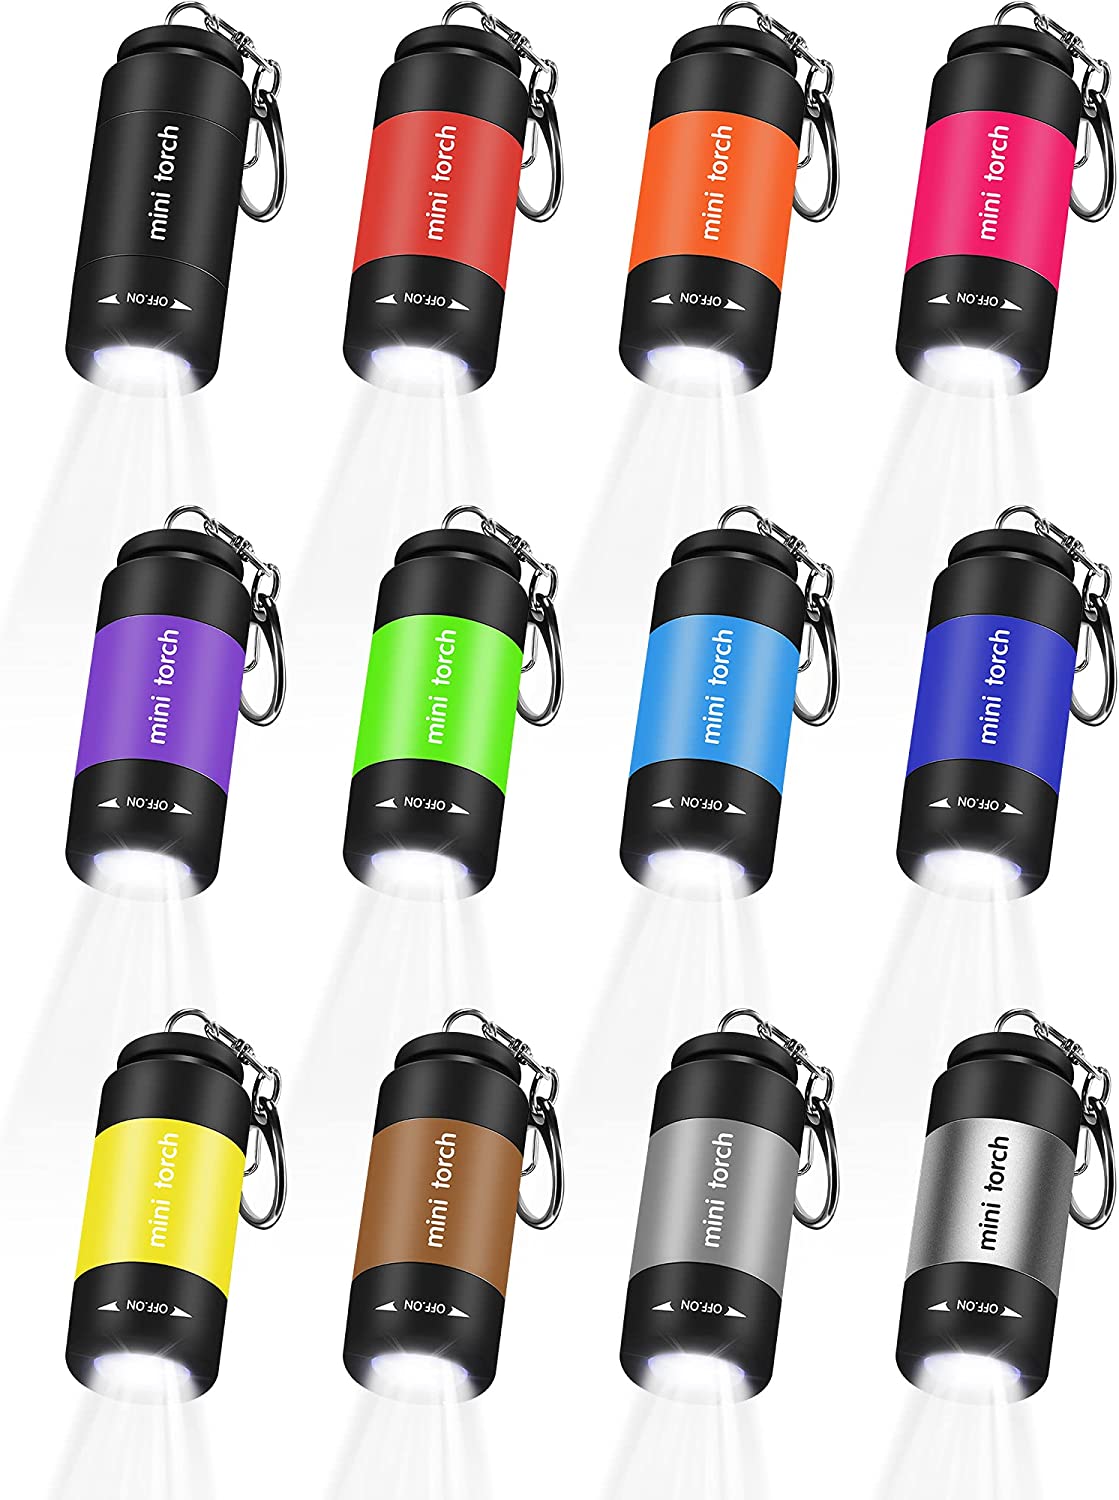 12 Pieces Mini Keychain Flashlight, USB Torch Rechargeable Colorful LED Flashlight High-Powered Keychain Lamp, Multicolor (White Light)